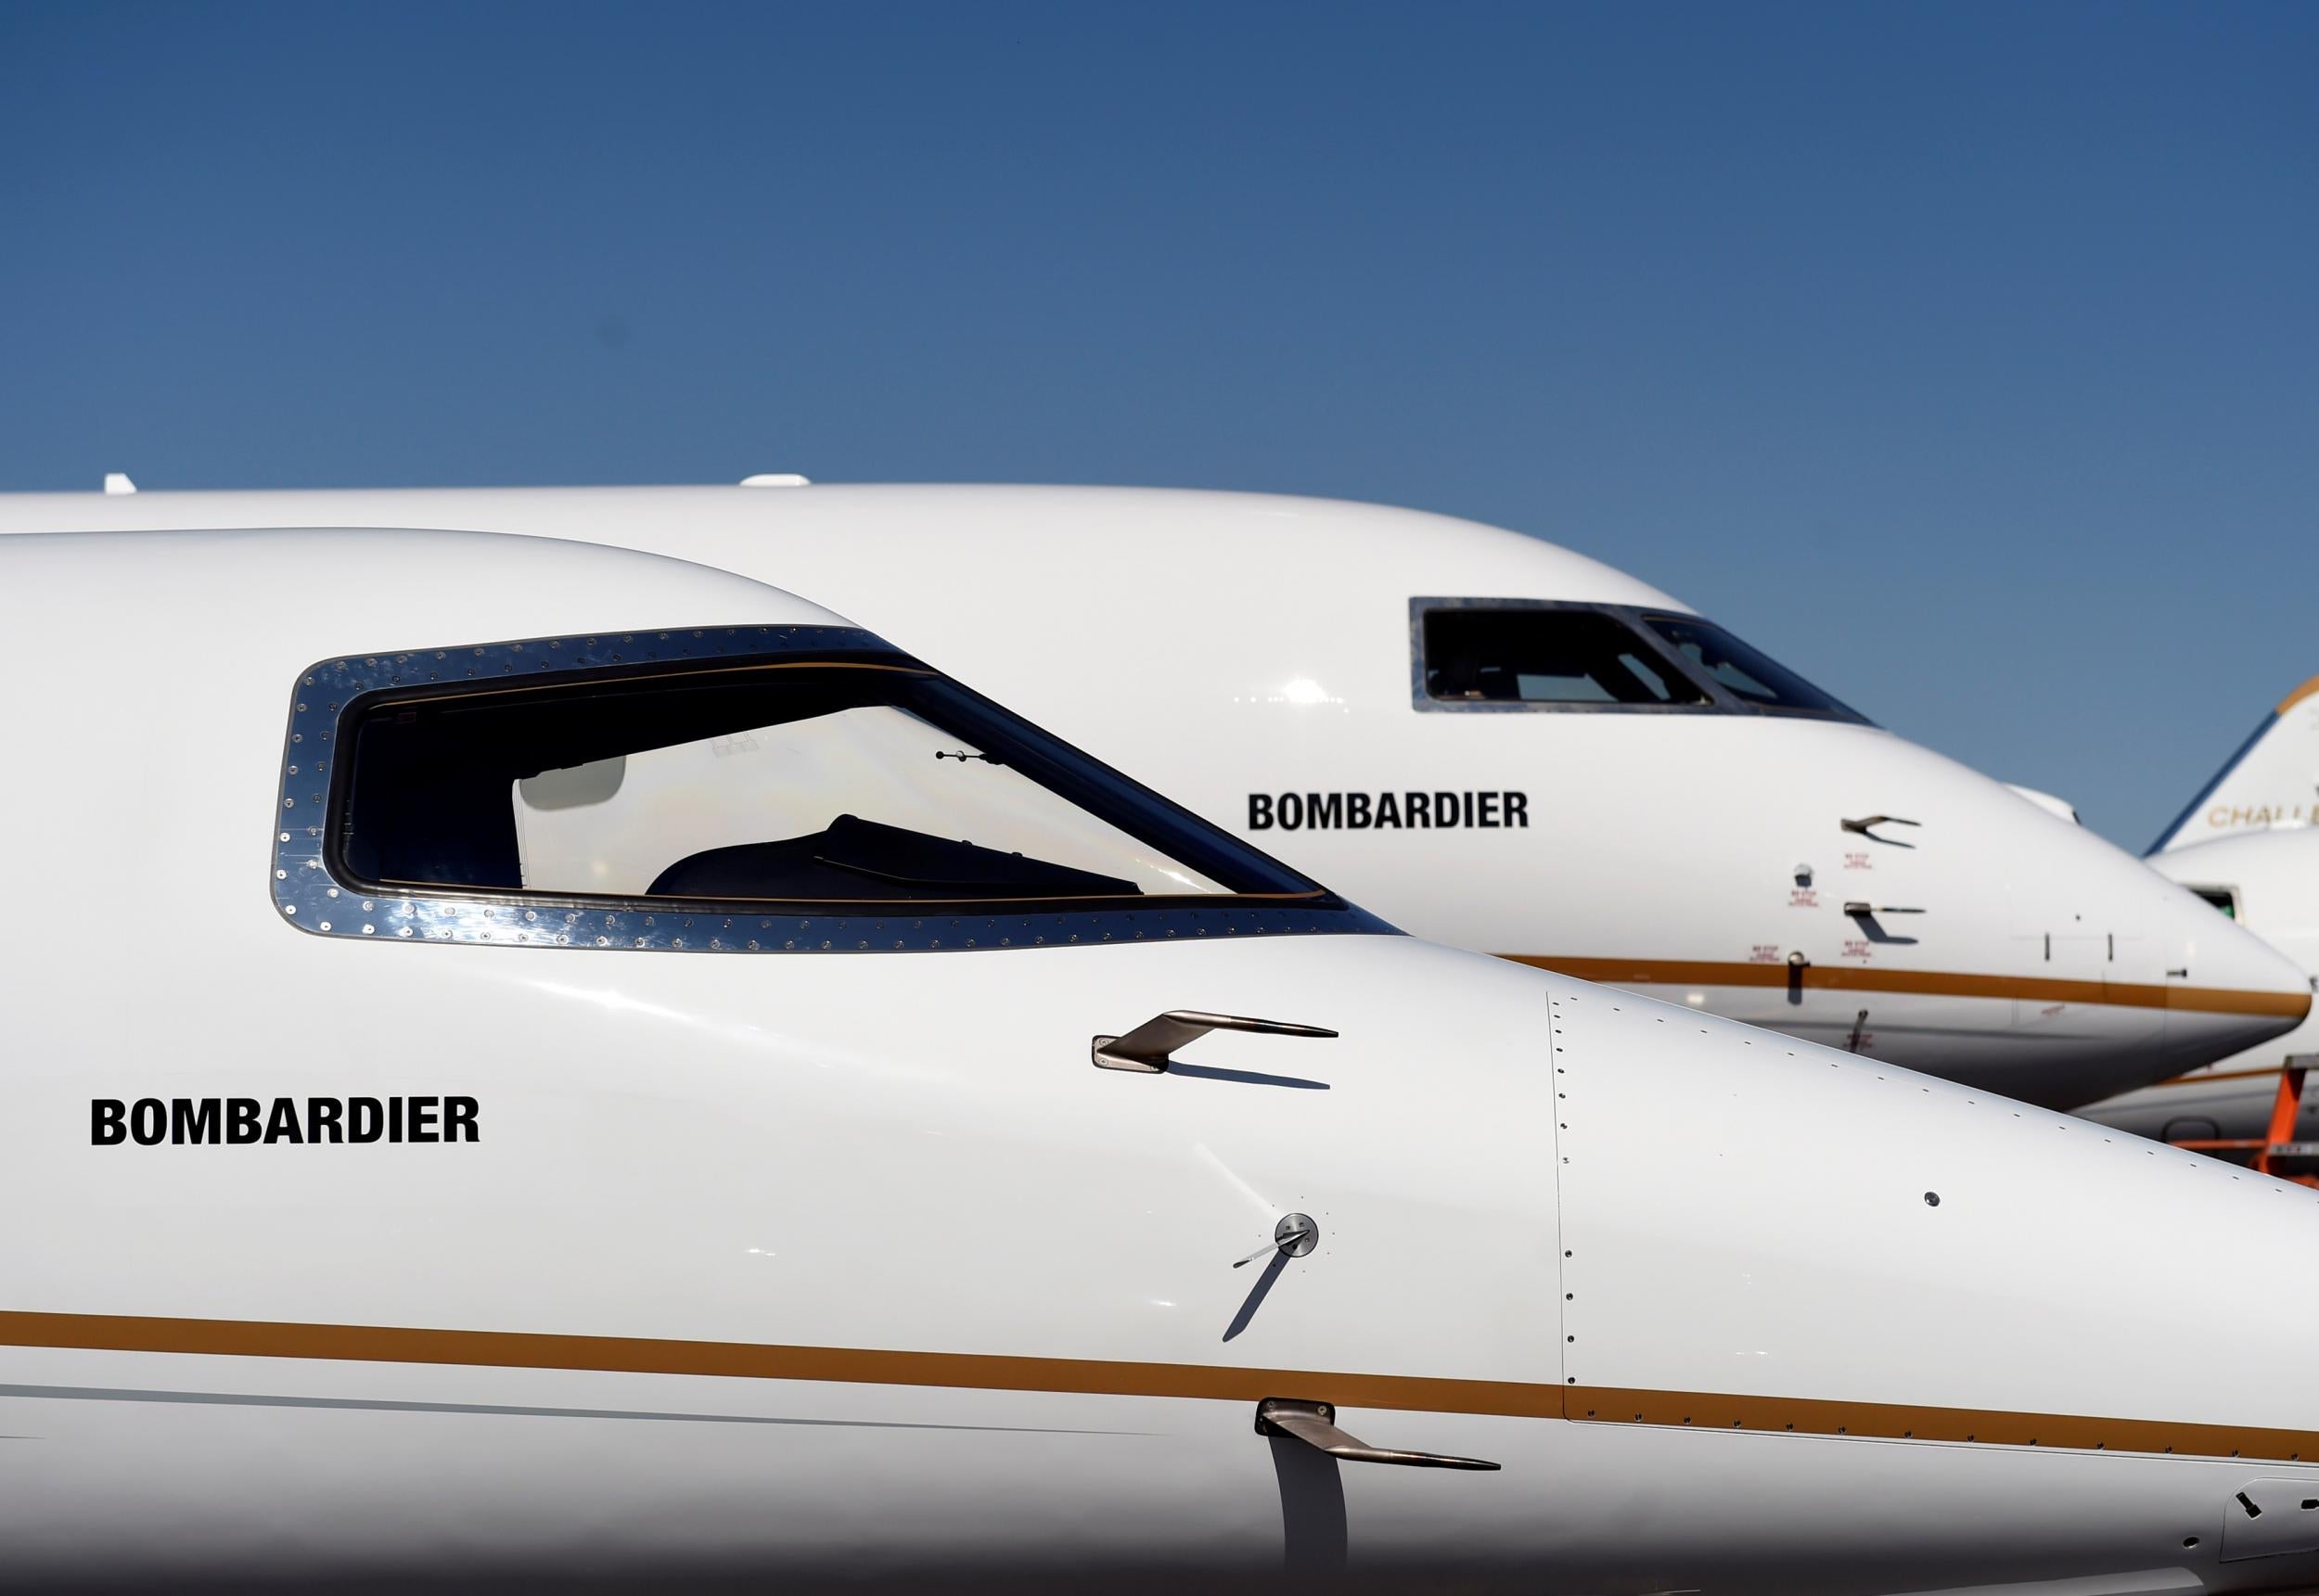 Asset sales or investment deals in aerospace would raise money for Bombardier